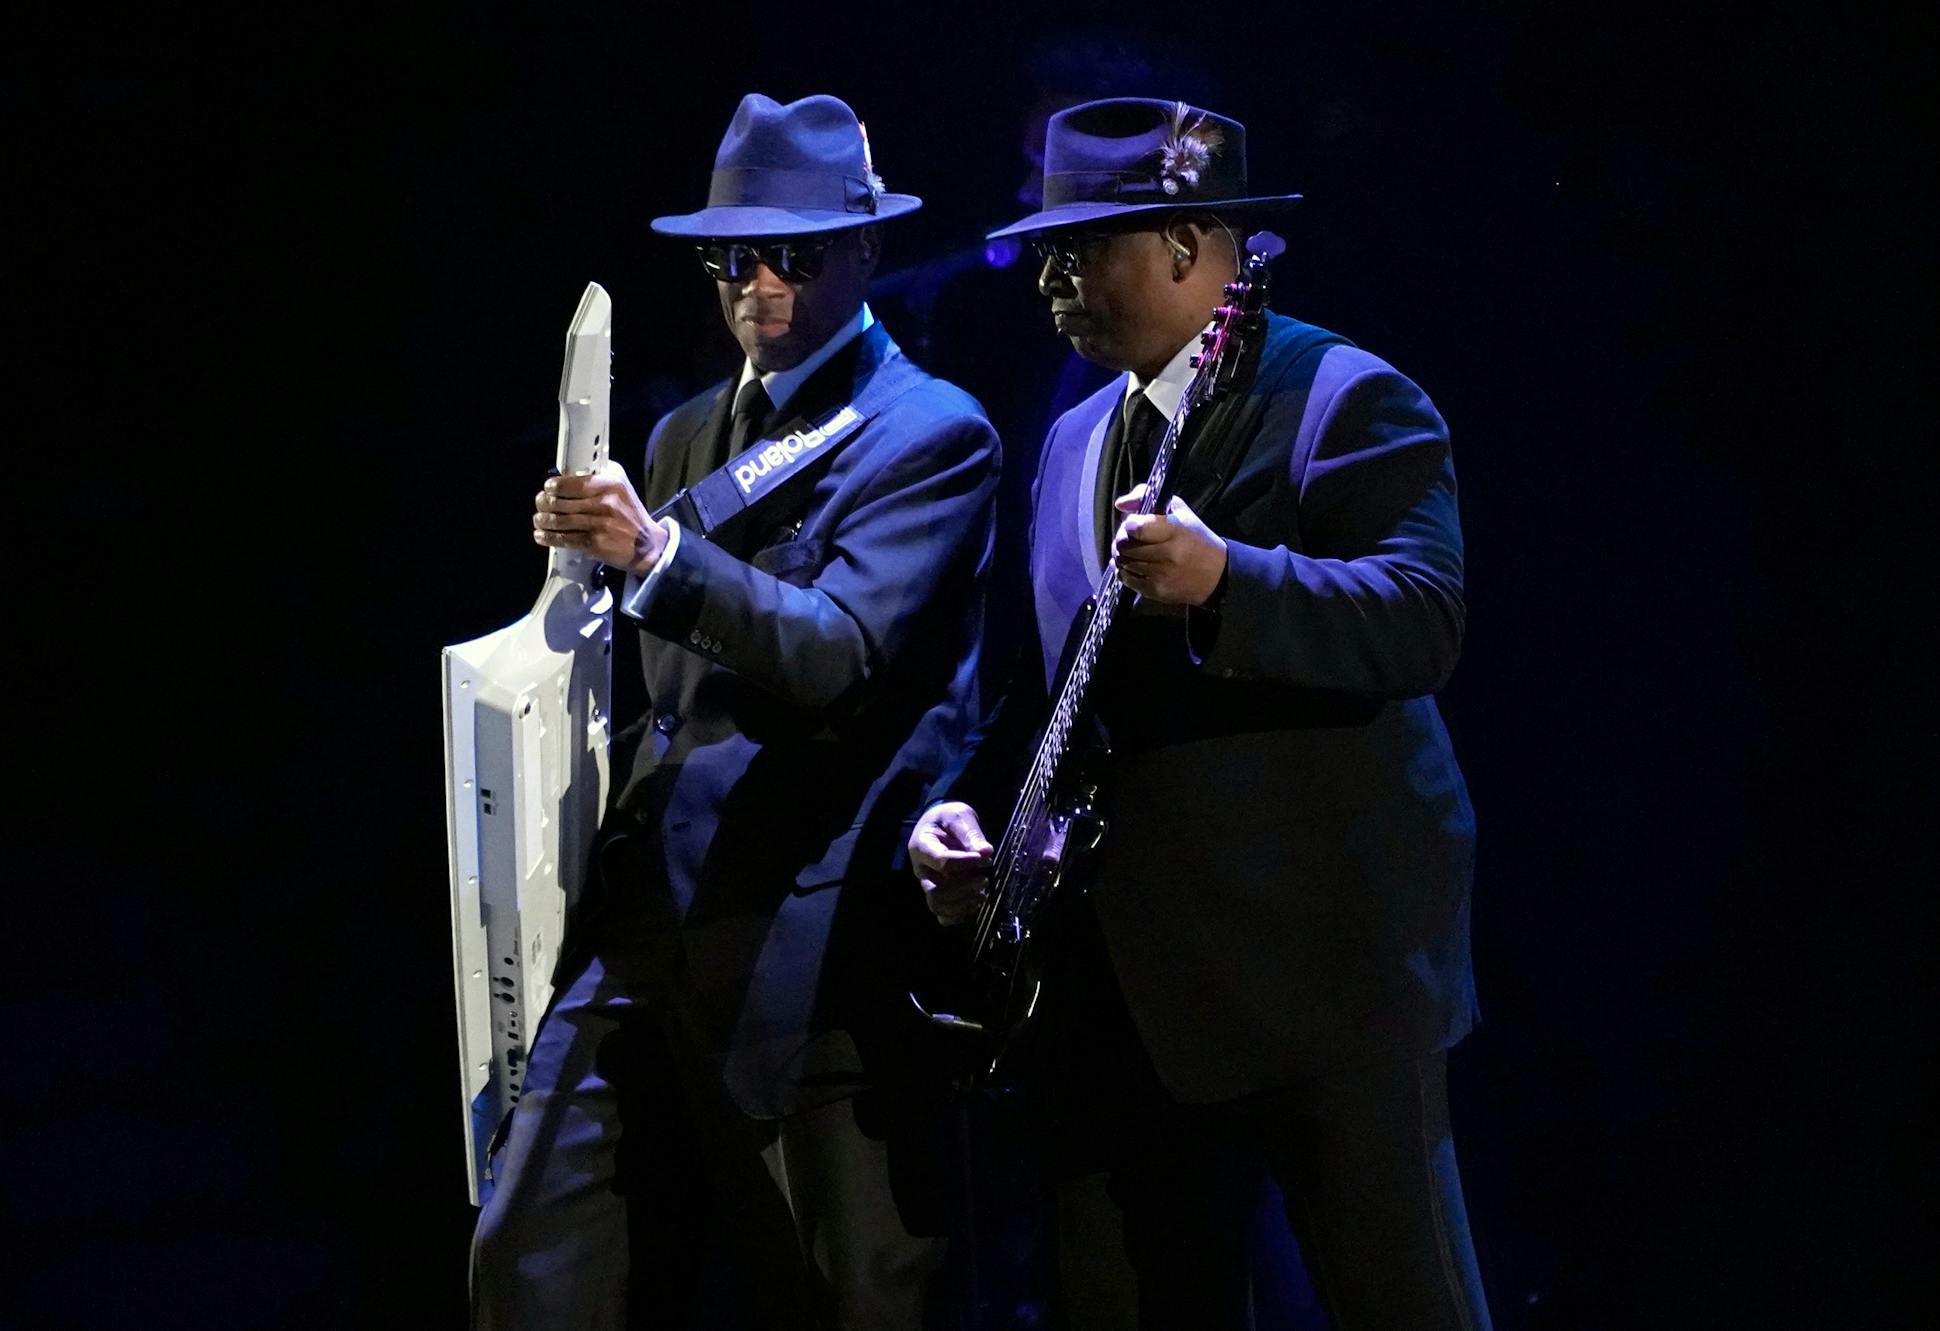 Jam and Lewis performed at the 64th Annual Grammy Awards in April 2022 in Las Vegas.